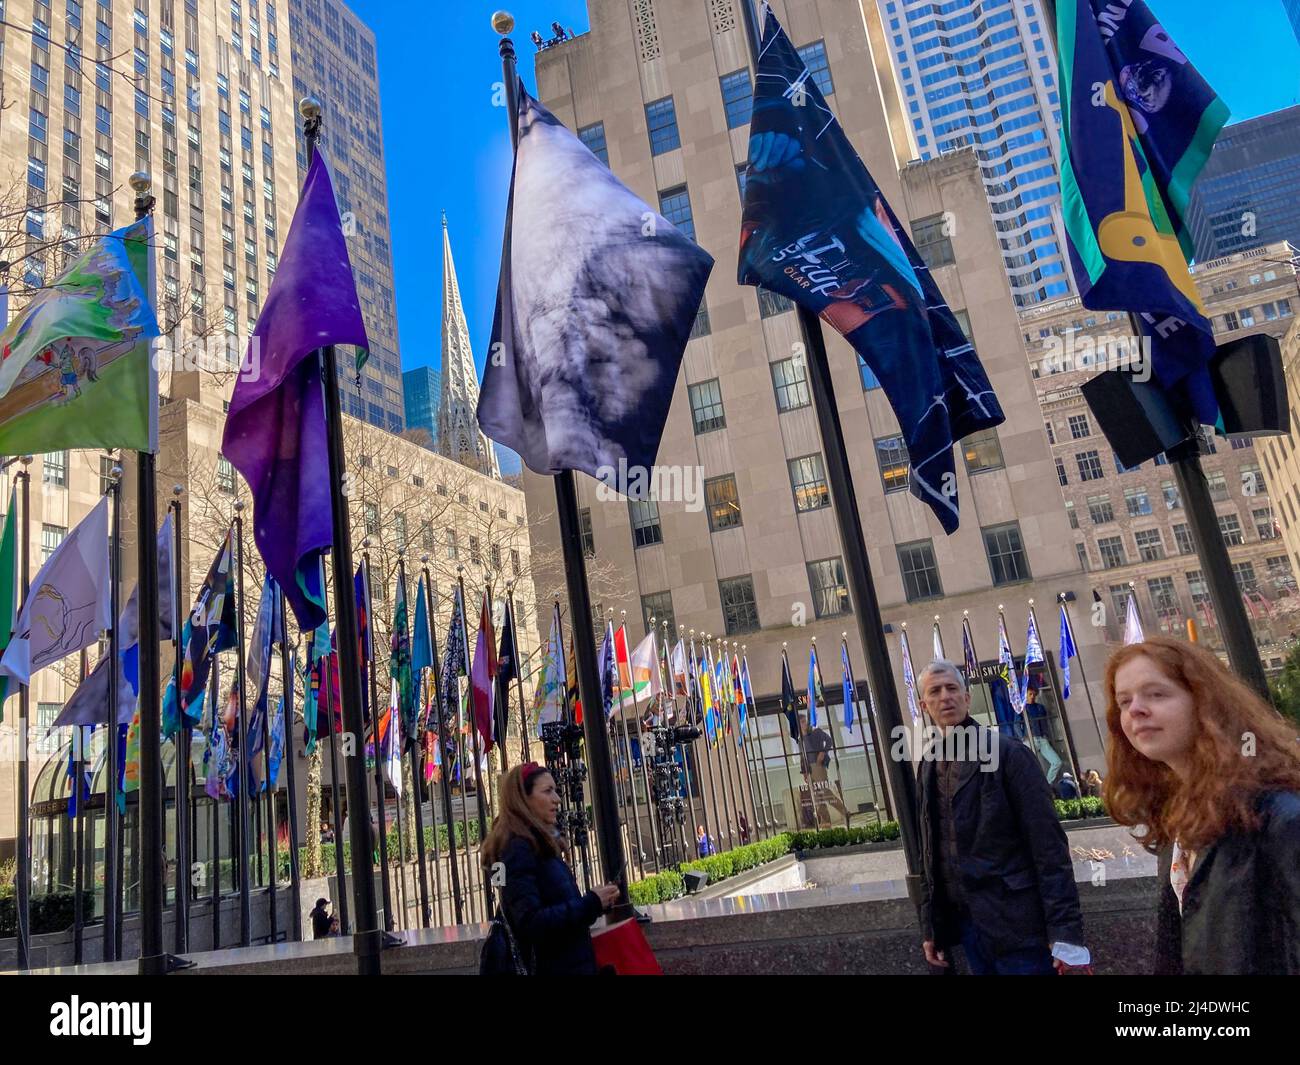 The 193 flags surrounding the rink at Rockefeller Center in New York on Friday, April 1, 2022 showcase the work of individuals who designed flags according to the theme “Only One Earth”. The collaboration  between the UN Environment Programme, the Climate Museum and Rockefeller Center showcases the 193 winning designs, all printed onto biodegradable flags. The flags will remain on display until May 6. (© Frances M. Roberts) Stock Photo